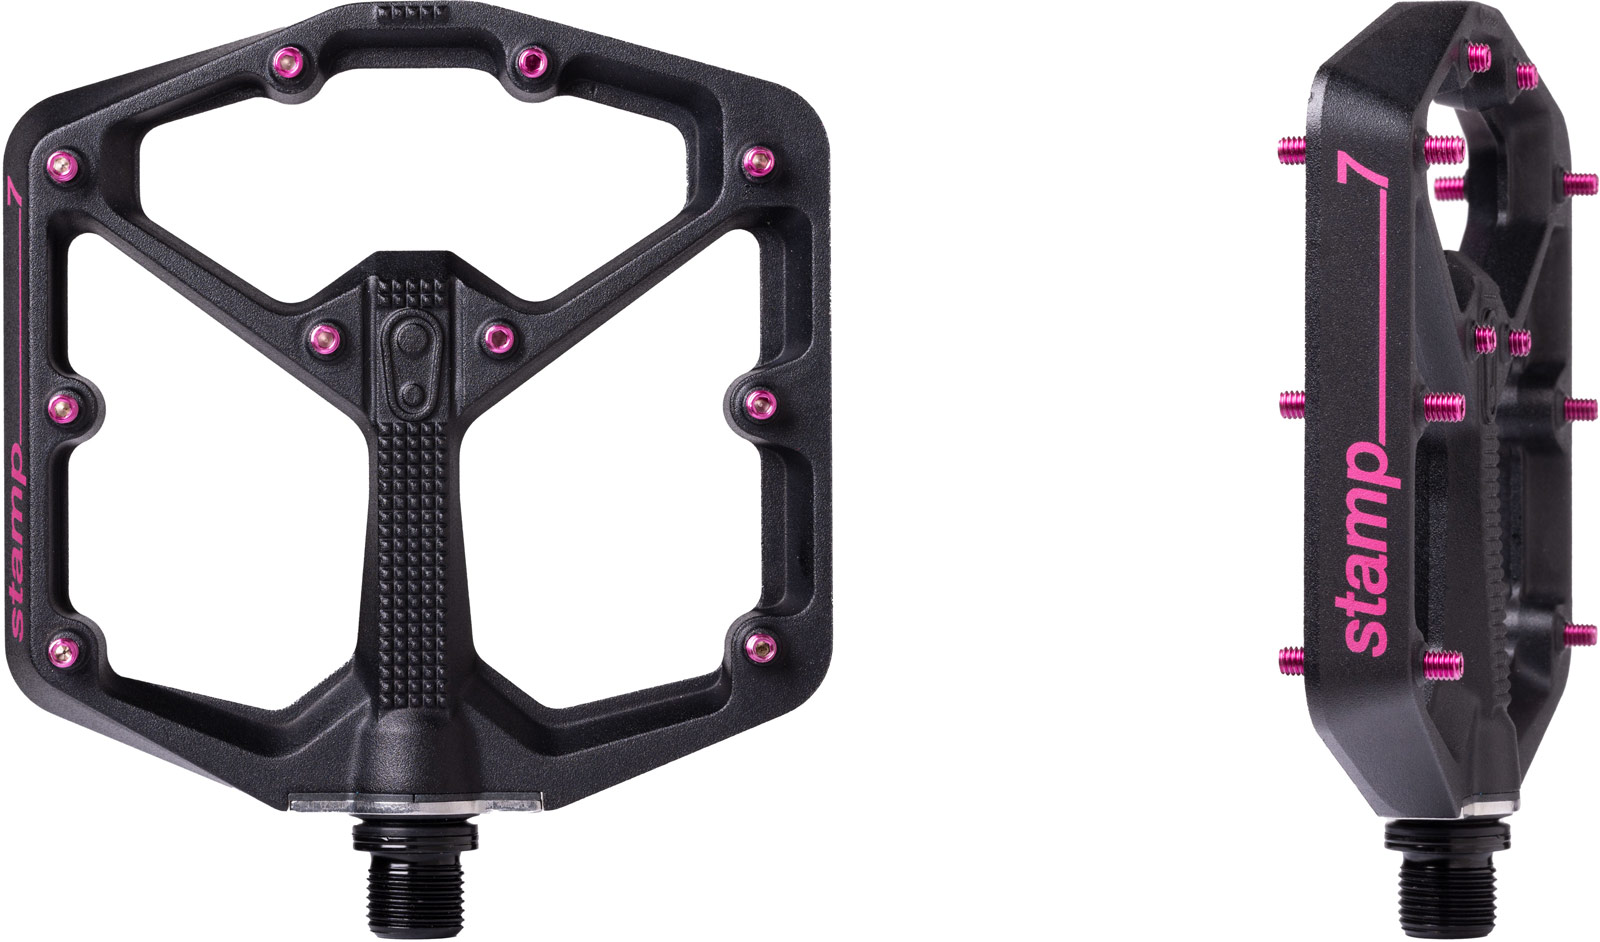 Crankbrothers x Seagrave brings Black & Pink Mallet DH and Stamp 7